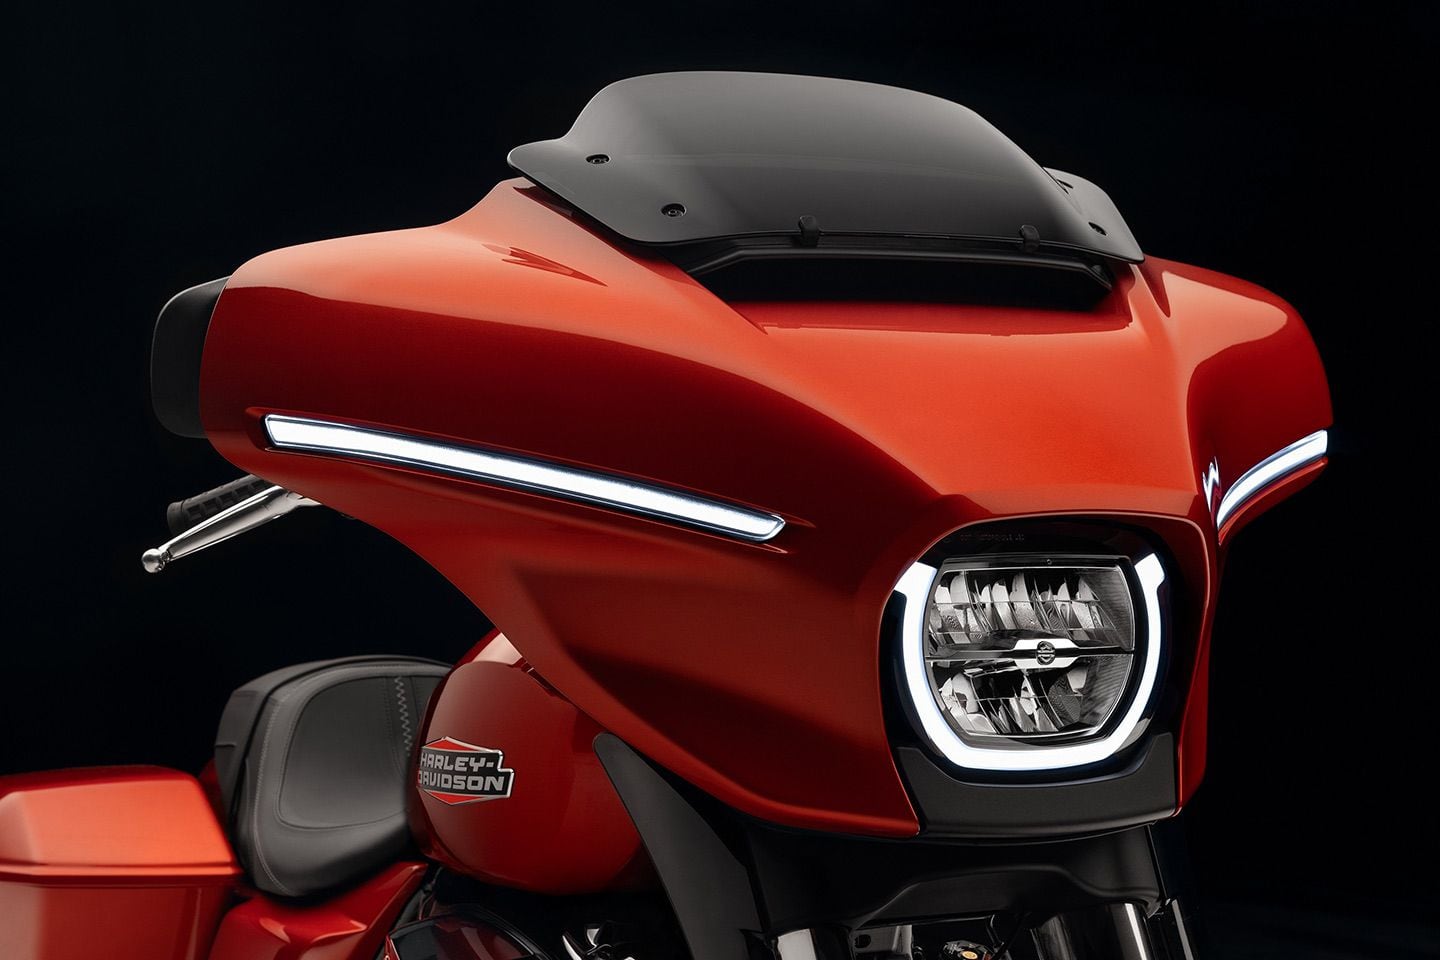 The redesigned fork-mounted fairing on the 2024 Street Glide gets fully integrated LED lighting, and a split-stream vent opening along with improved aerodynamics and a new silhouette.